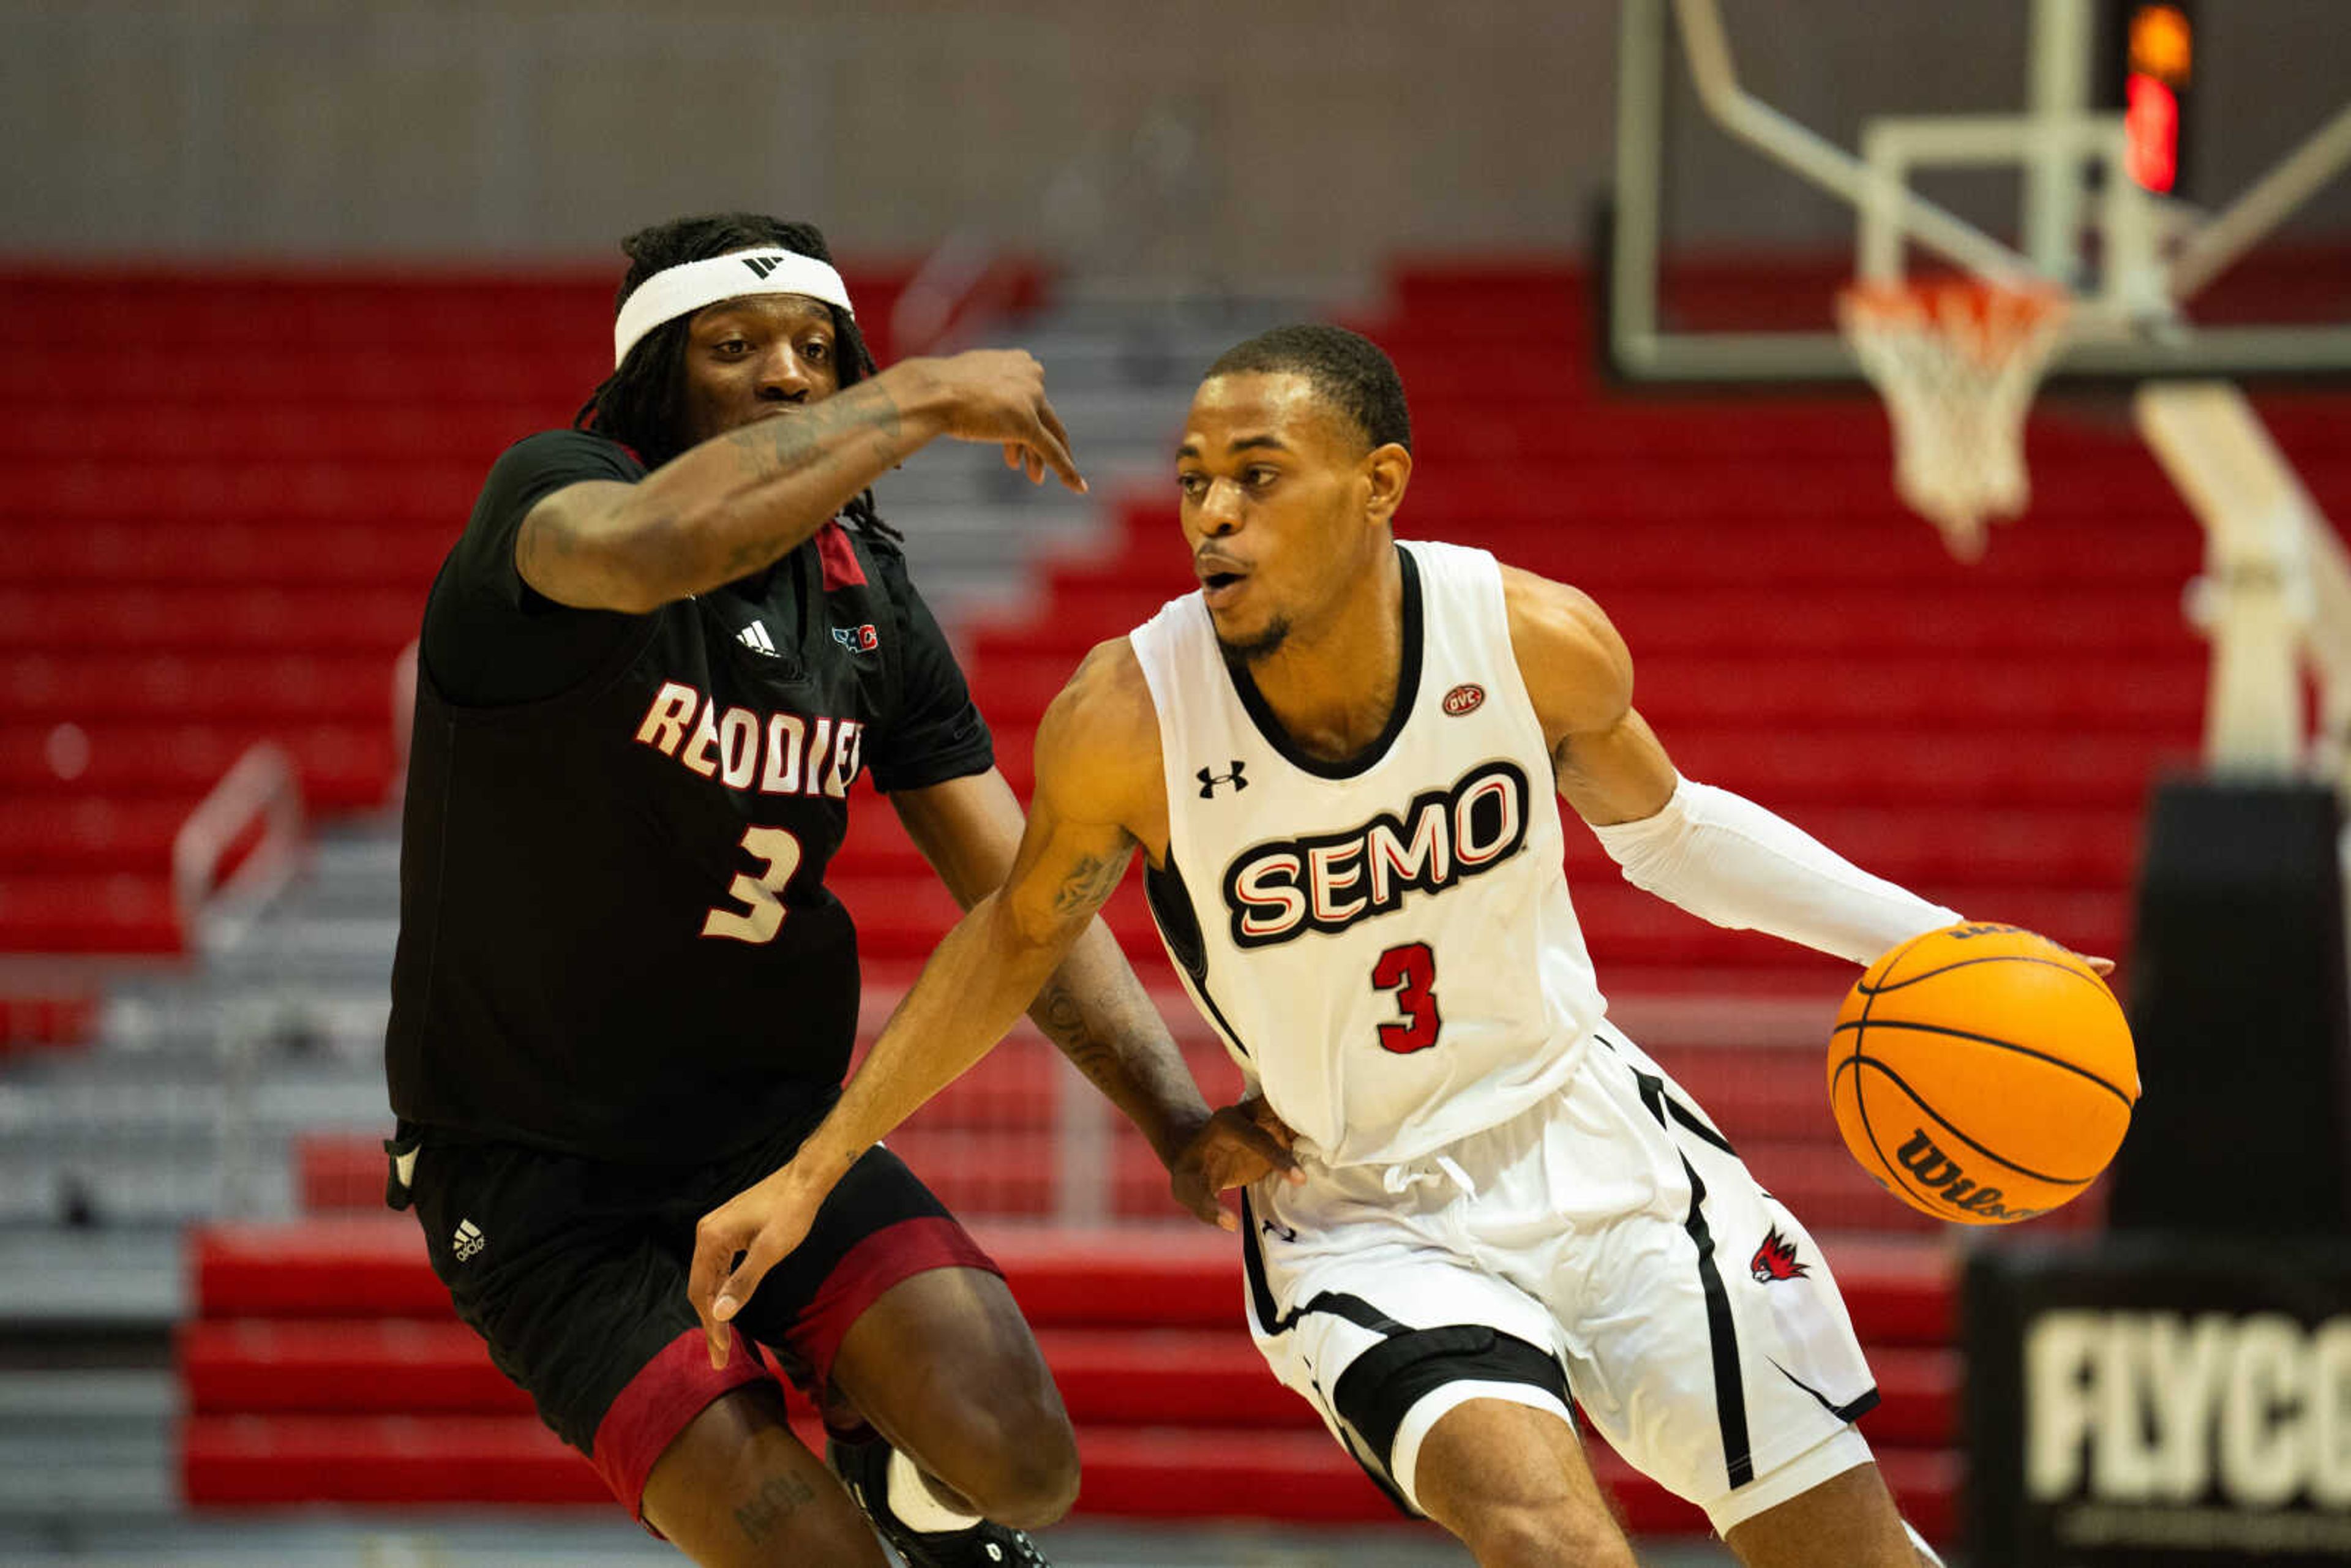 Junior guard Aquan Smart (3) drives past a Henderson State defender during SEMO's 76-61 on Oct. 23 at the Show-Me Center. Smart finished the contest as SEMO's leading scorer with 16 points.